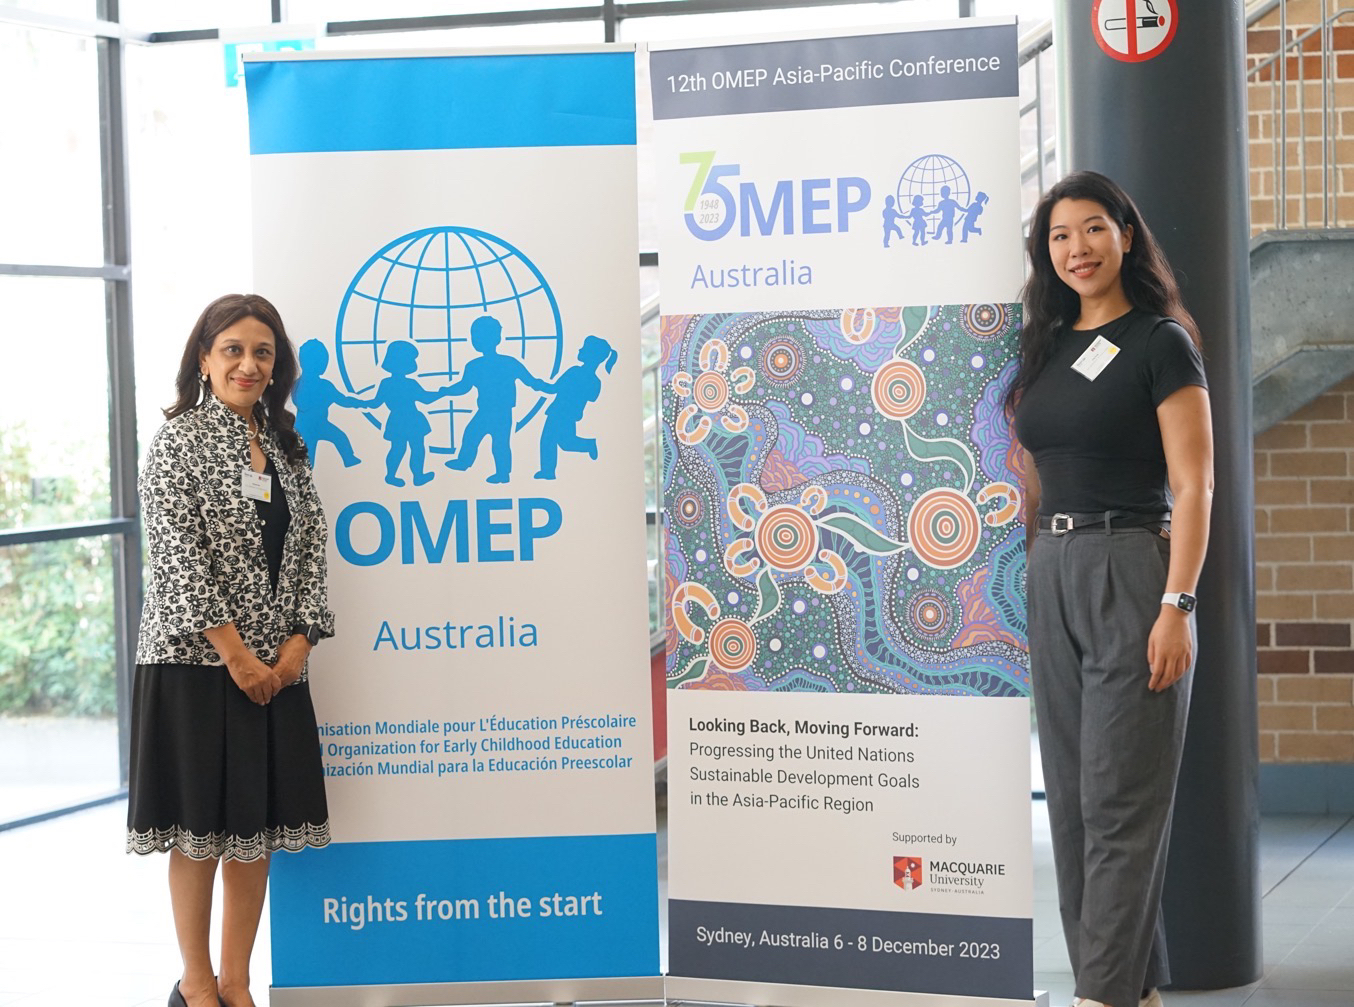 – CORE Members Attended the 12th OMEP Asia-Pacific Conference